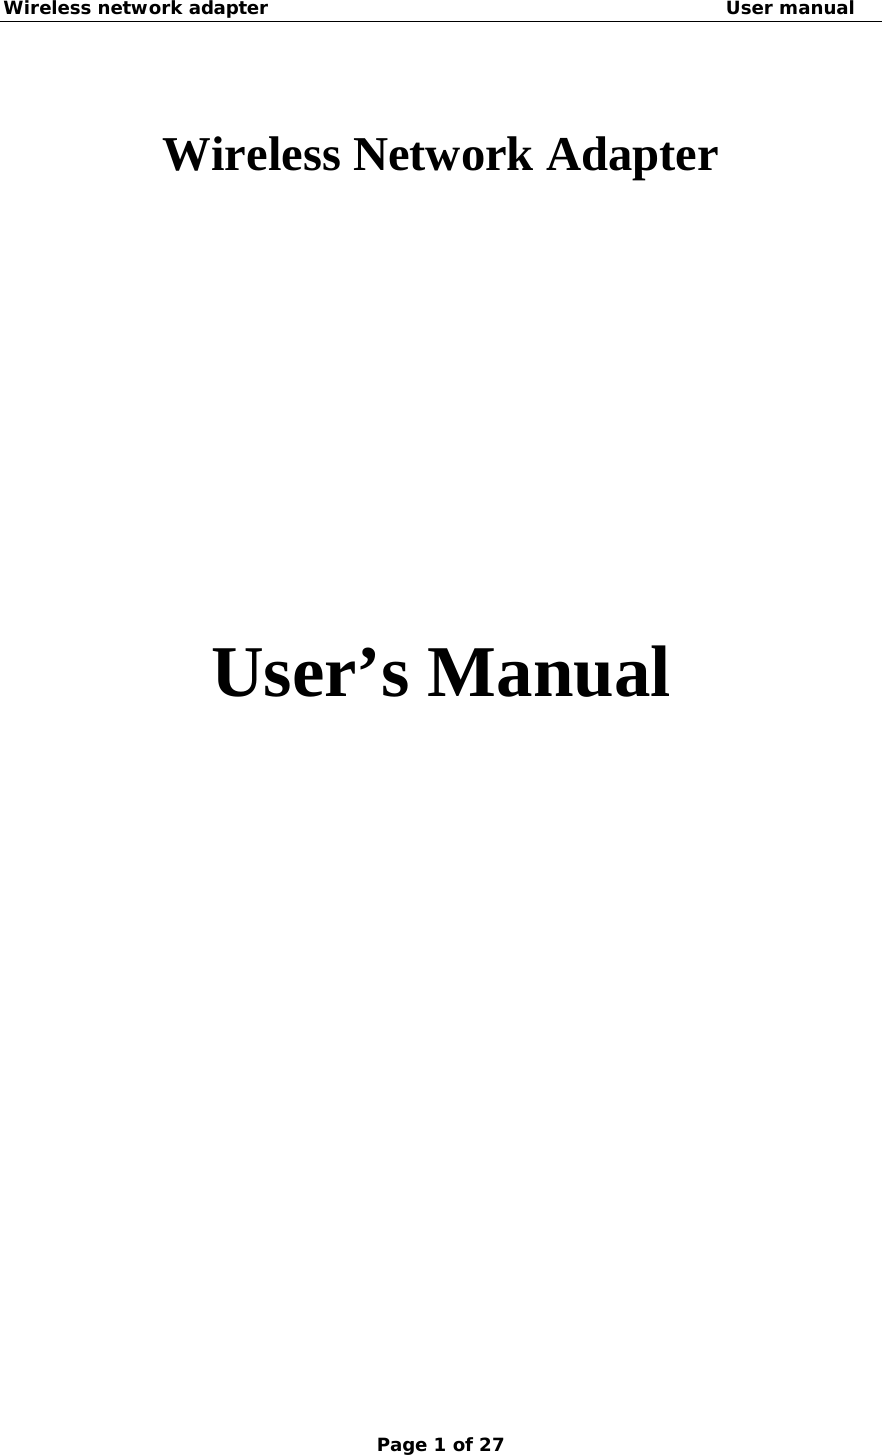 Wireless network adapter                                                  User manual Page 1 of 27  Wireless Network Adapter             User’s Manual            